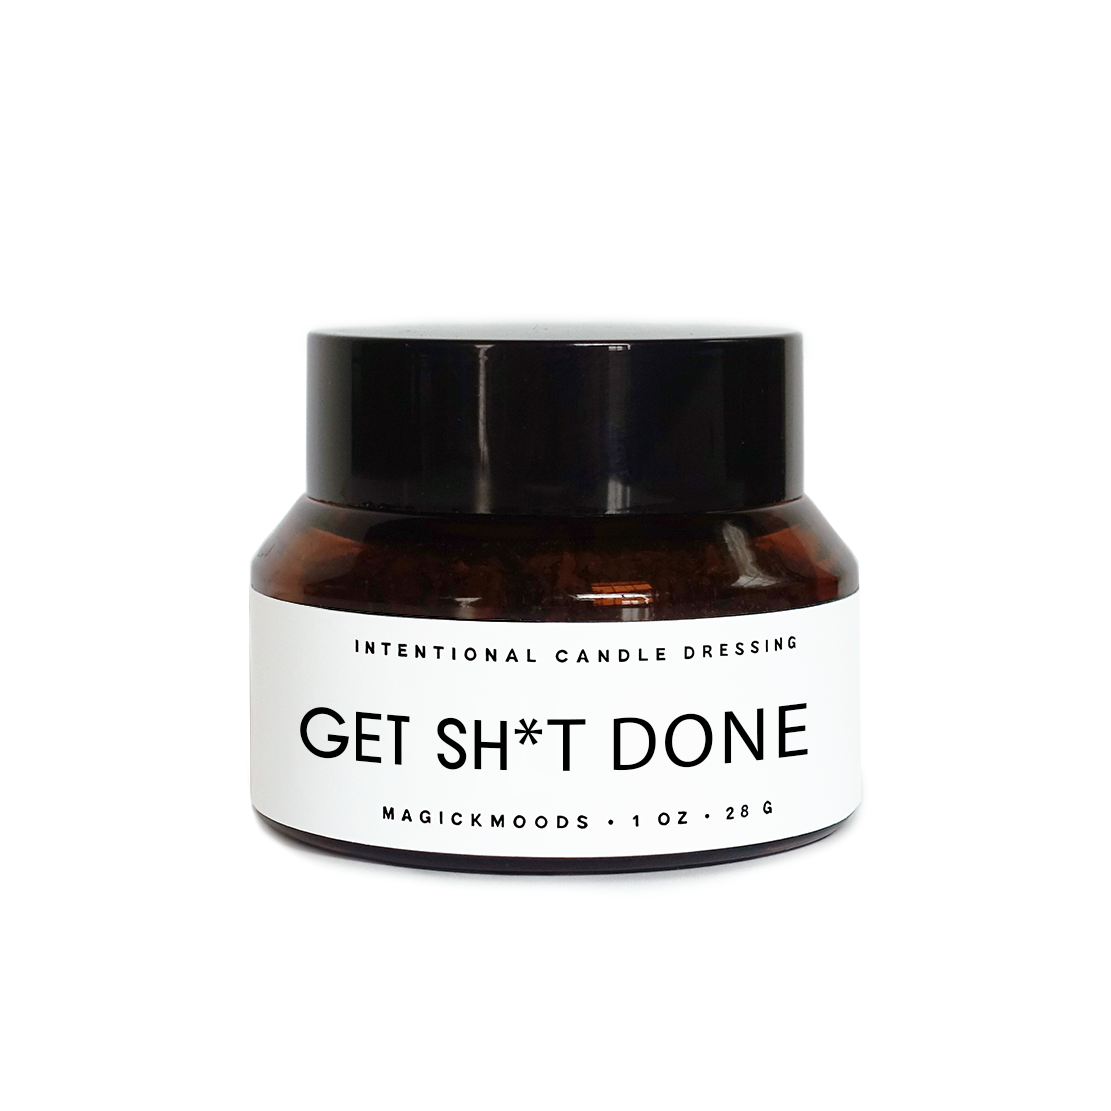 Get Sh*t Done Candle Dressing